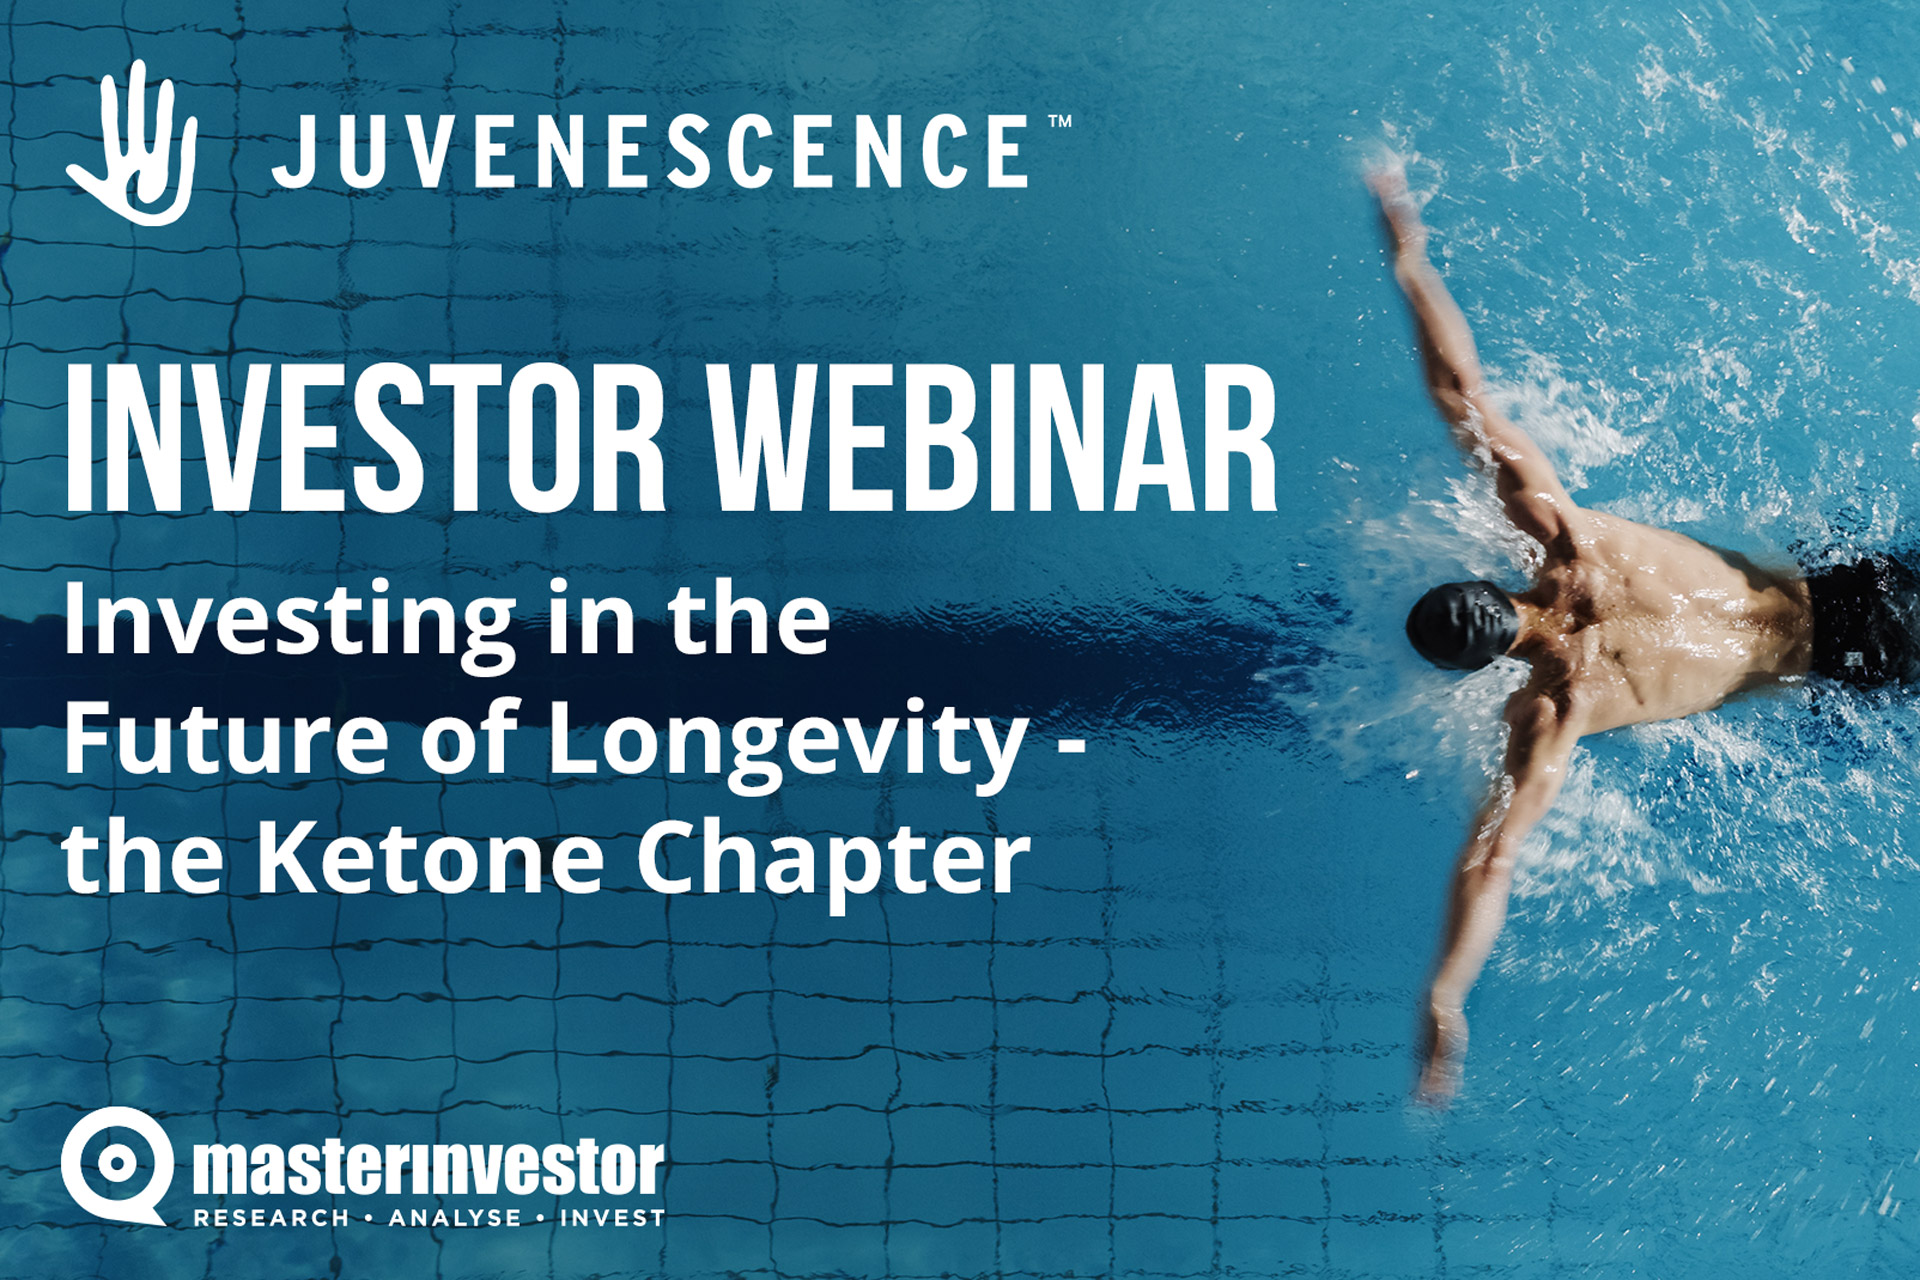 Investing in the Future of Longevity - the Ketone Chapter